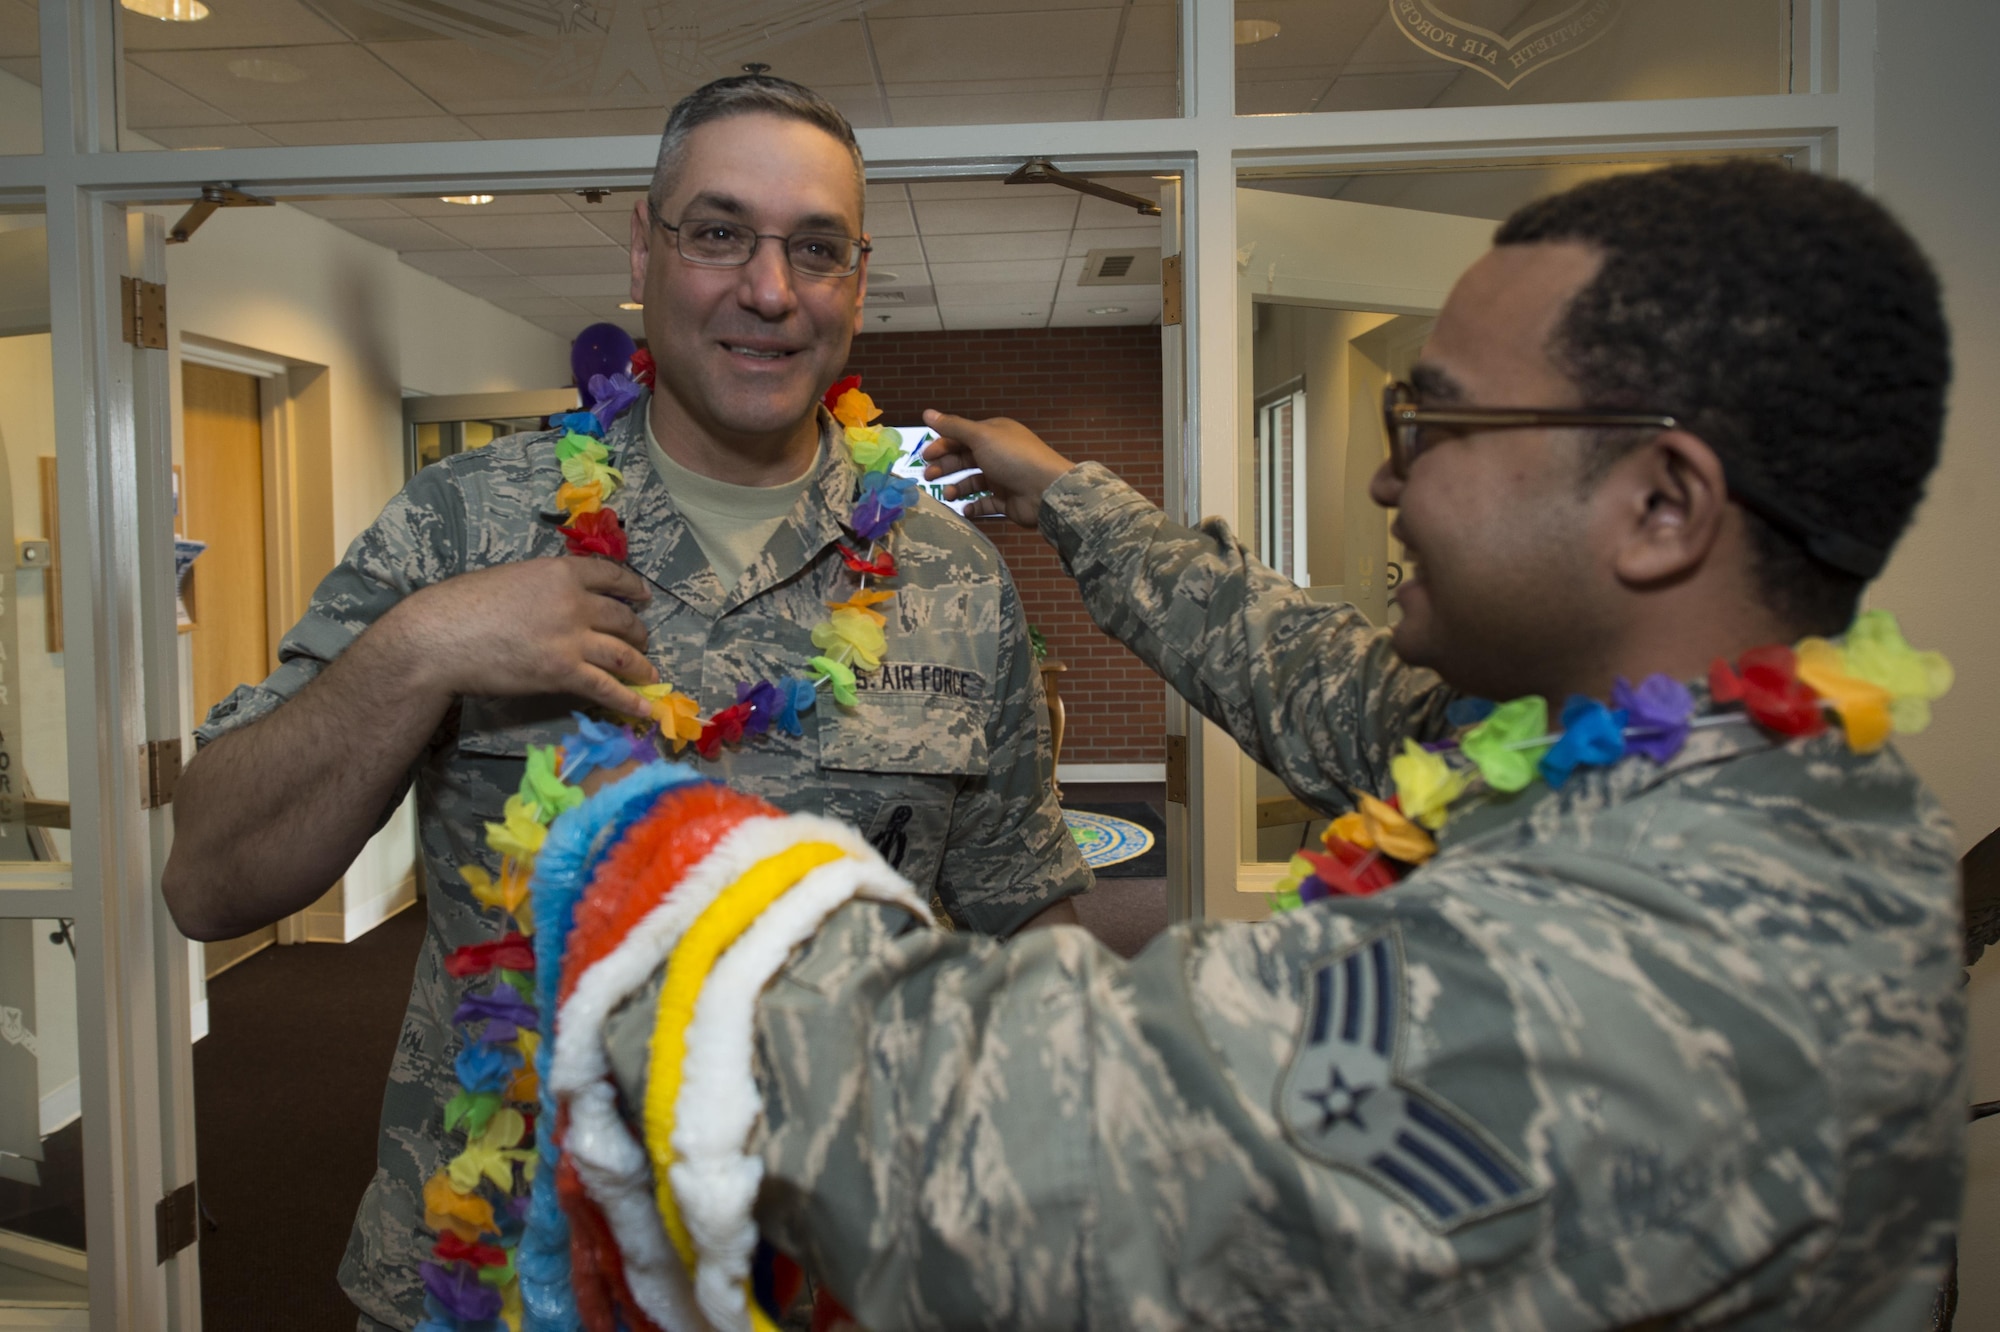 Col. Stephen M. Kravitsky, 90th Missile Wing commander, receives a Hawaiian Lei from Senior Airman Justin Tua, 790th Maintenance Squadron maintenance scheduler, during the Joint Services Multicultural Event at F.E. Warren Air Force Base, Wyo., June 22, 2016. The multicultural event was a collaborative effort between the 90th Missile Wing, the 153rd Airlift Wing, and the Army National Guard to celebrate military diversity.  (U.S. Air Force photo by Staff Sgt. Christopher Ruano)